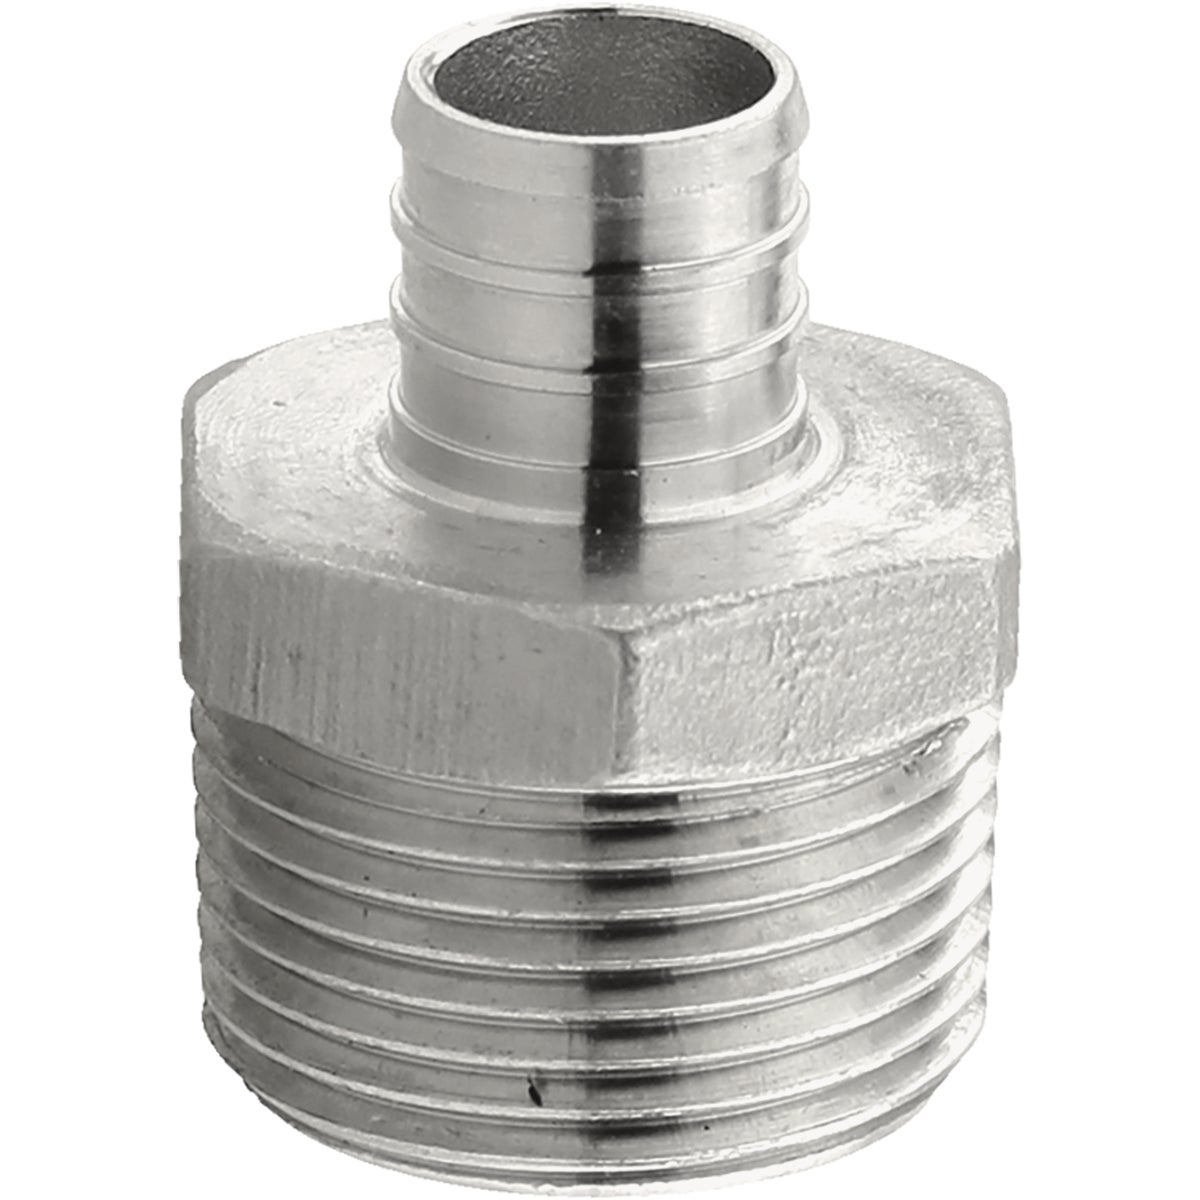 Plumbeez 3/4 In. x 1 In. MPT Stainless Steel PEX Adapter